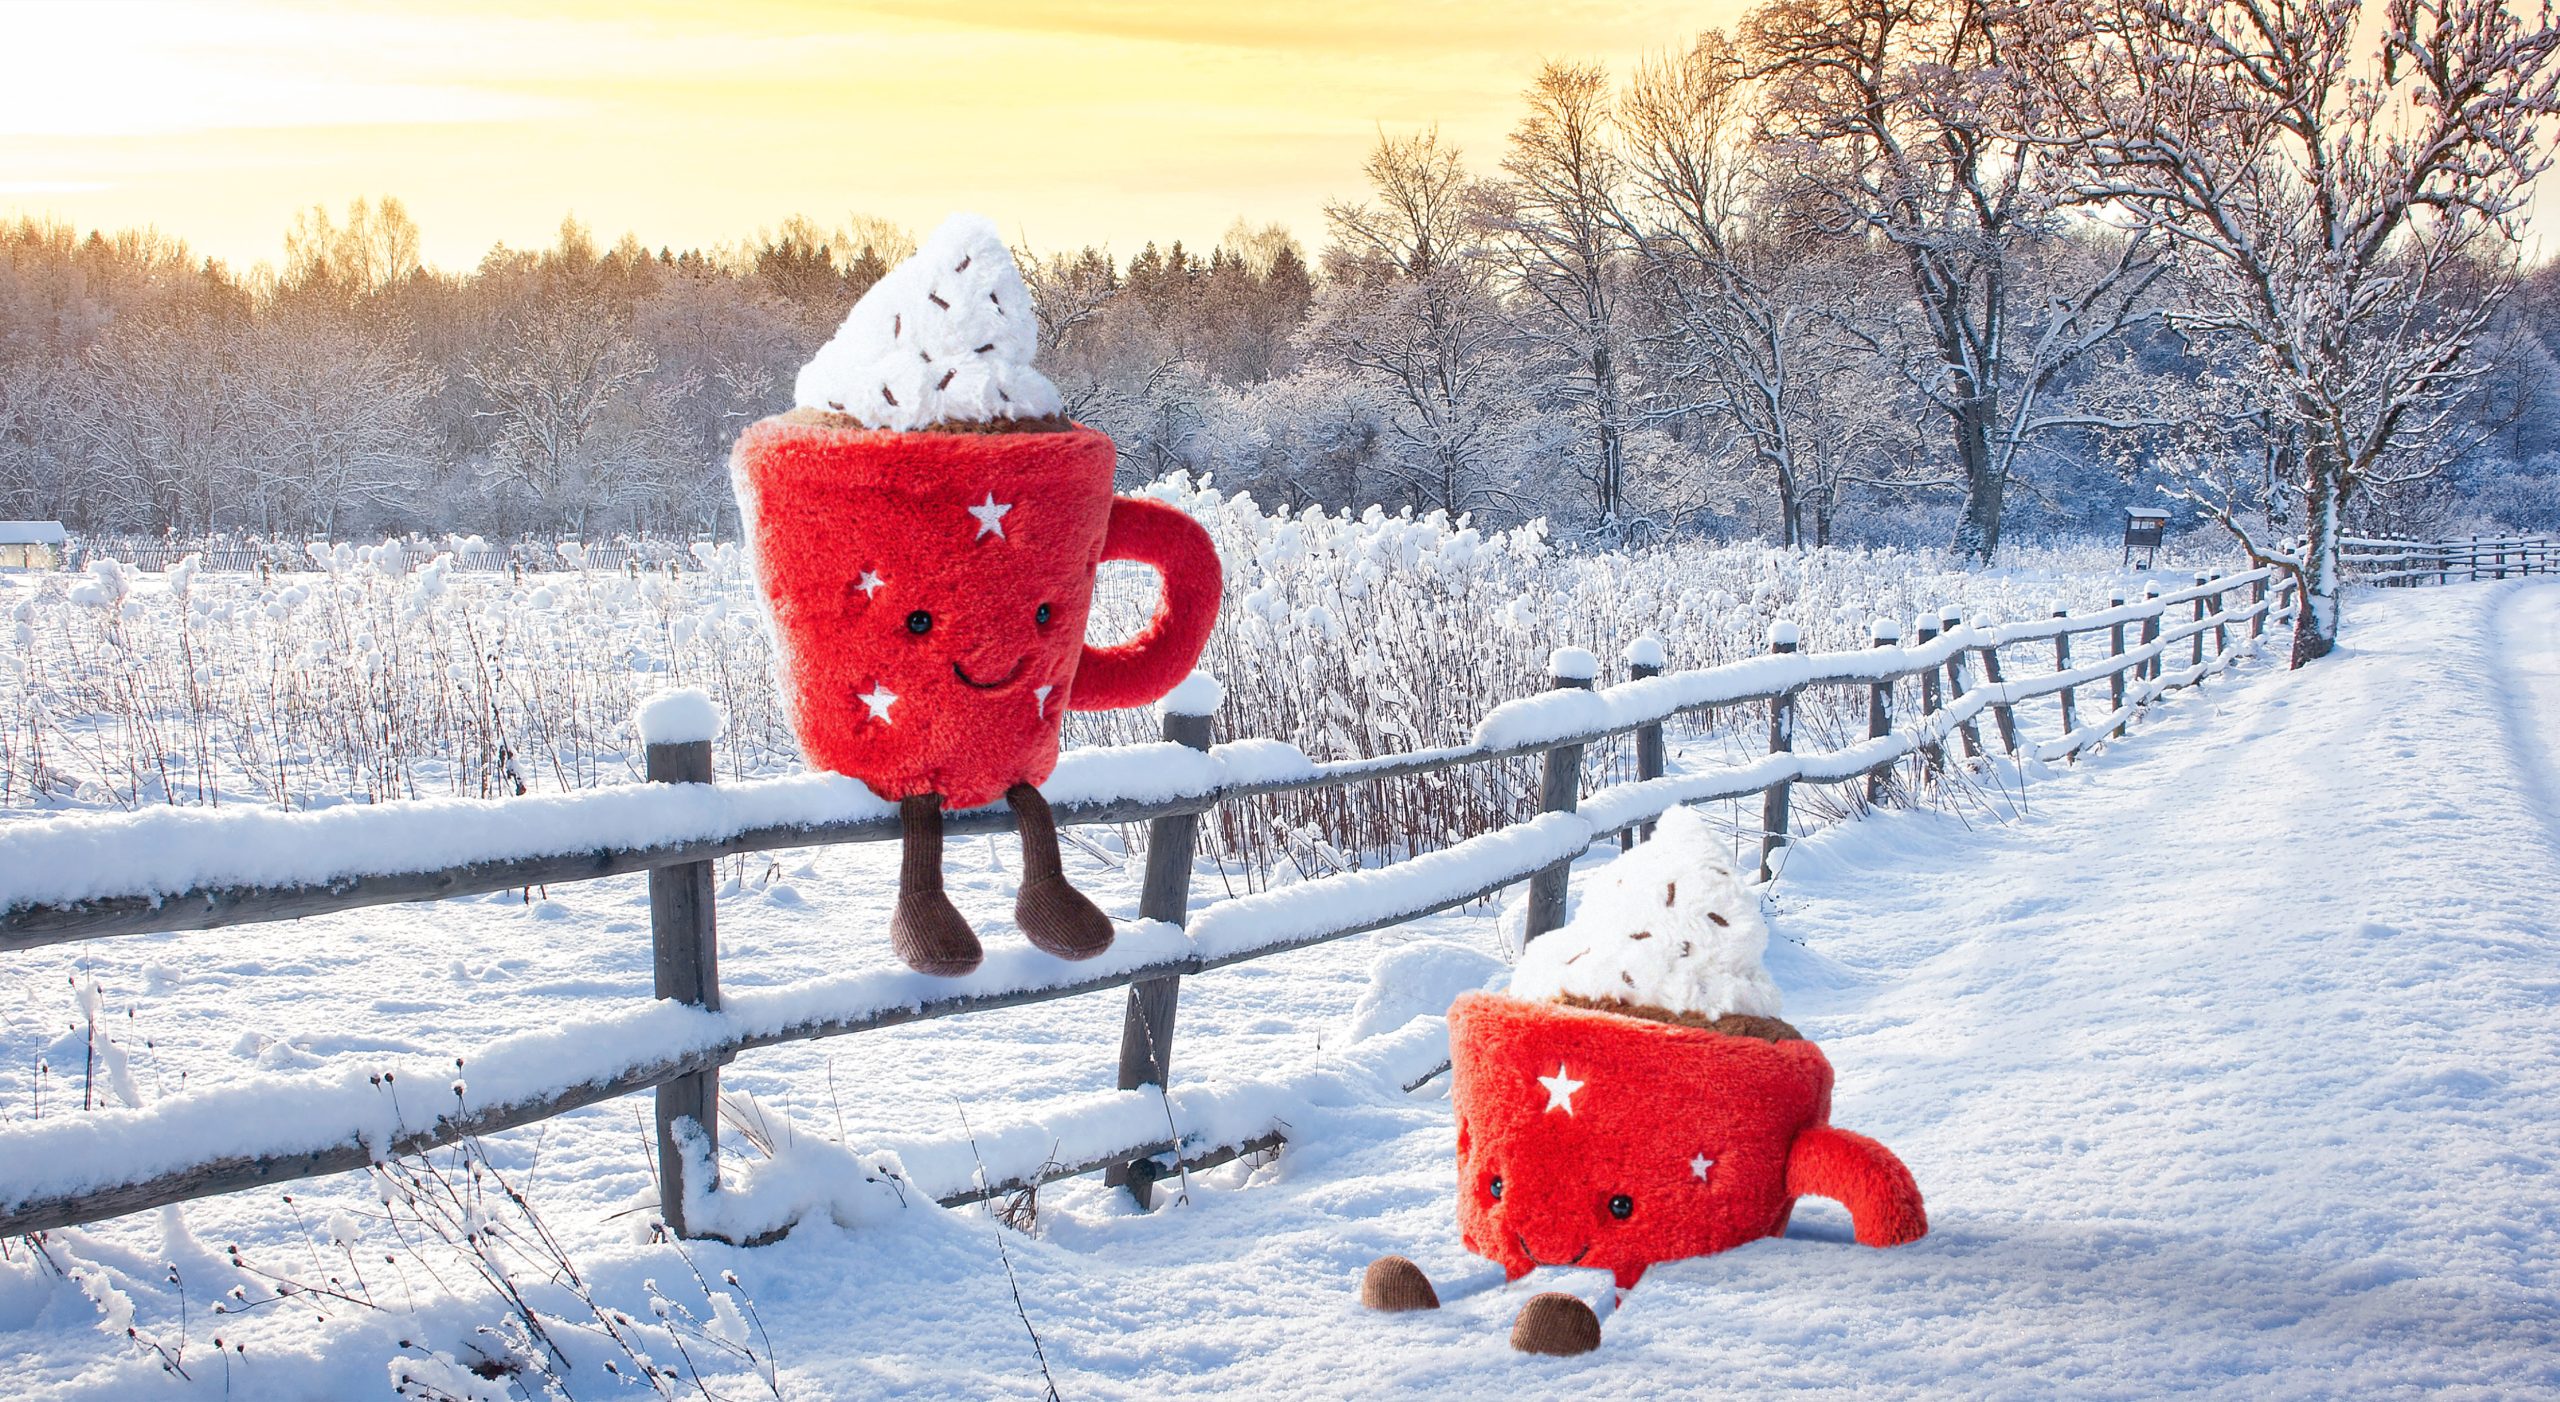 Red Jellycat mug plushies sitting in a snowy scene